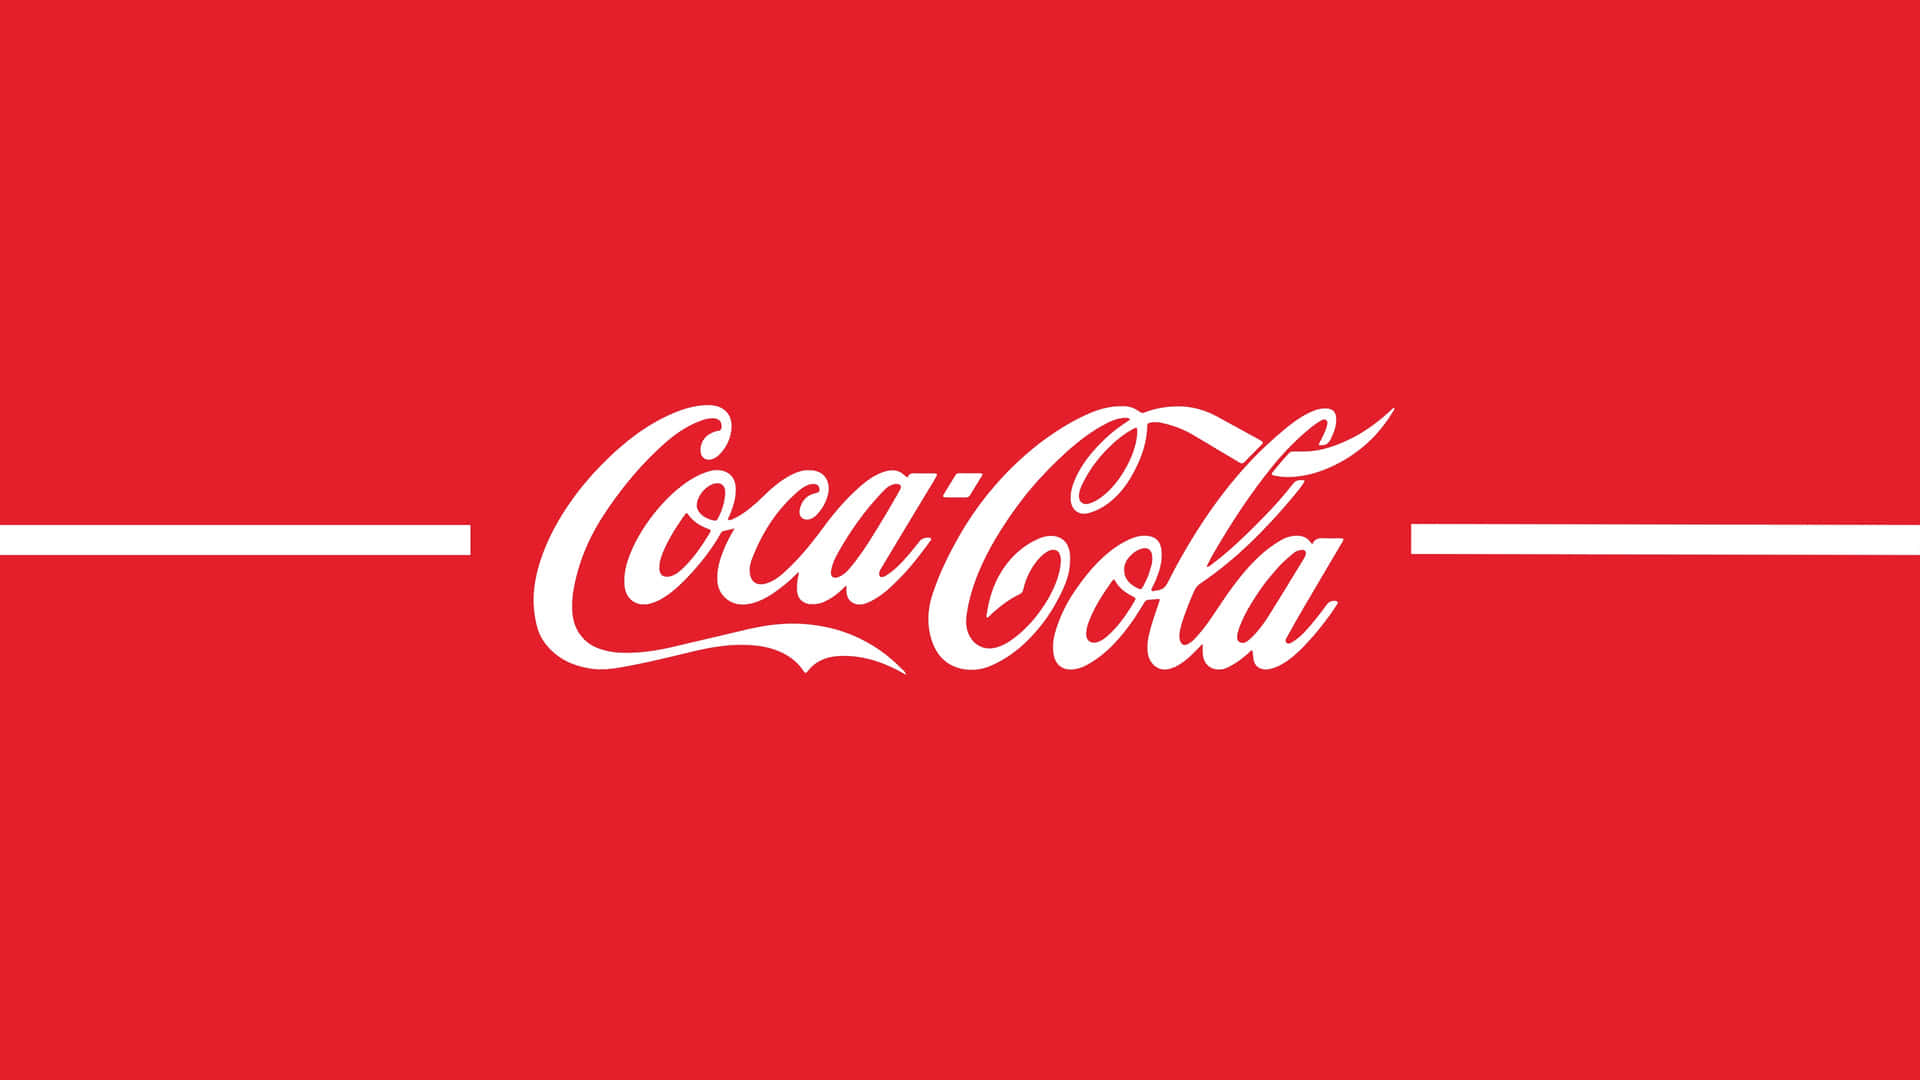 Coca Cola Logo On A Red Background